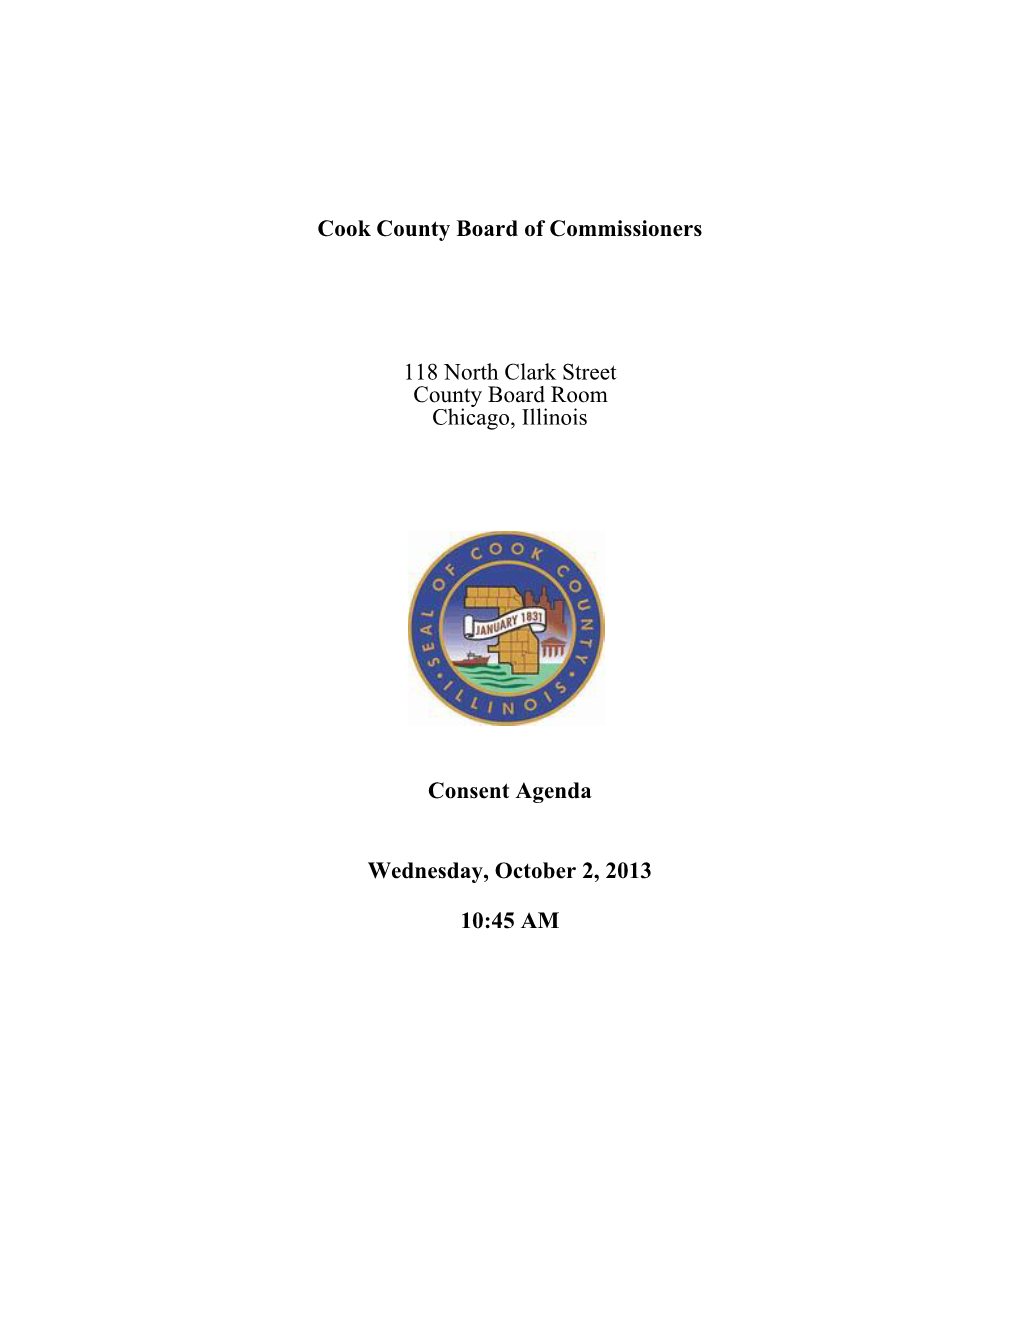 Cook County Board of Commissioners 118 North Clark Street County